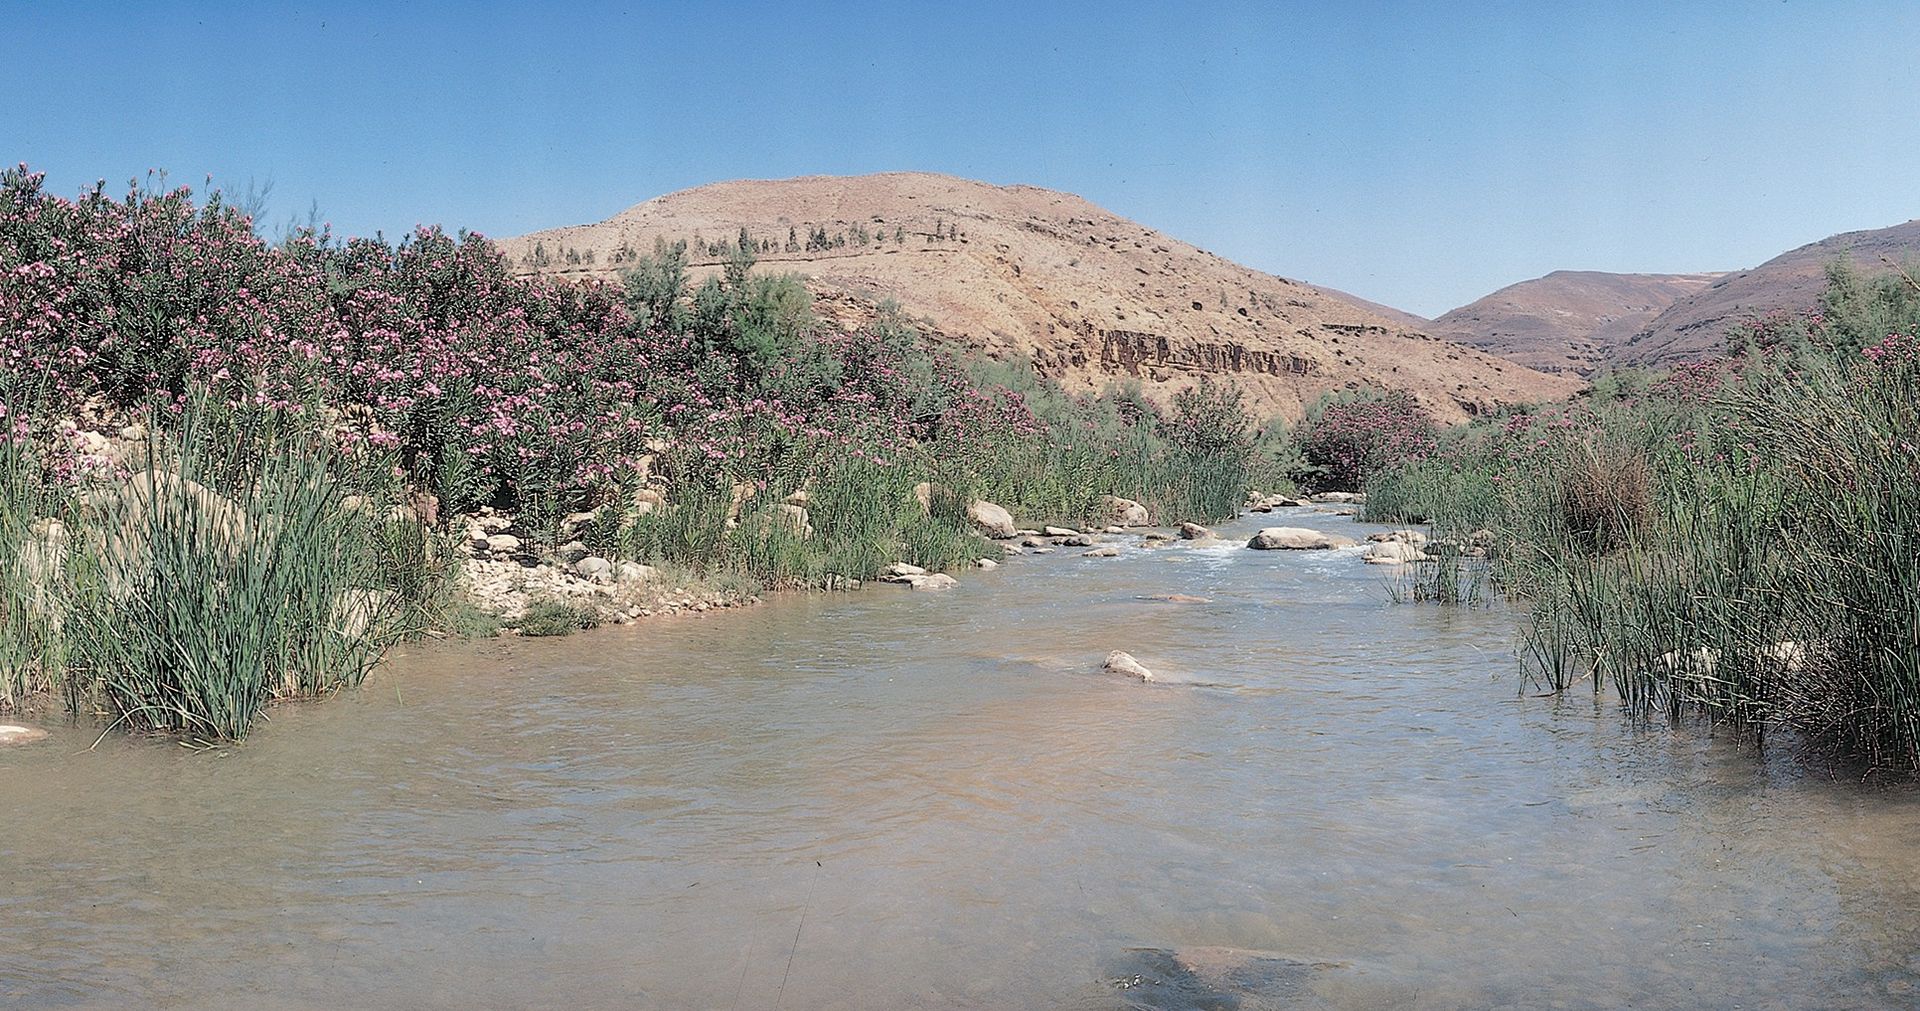 The Jabbok River flowing through the lower part of the Jordan Valley in the modern-day country of Jordan. Biblical/Historical info: The Old Testament Prophet Jacob (Israel) wrestled with the angel of the Lord near the Jabbok river. It was during this incident that the name of the Prophet was changed to Israel.(See Genesis 32:22-32) The river was one of the borders of the kingdom of the Old Testament King Sihon.(See Joshua 12:2)